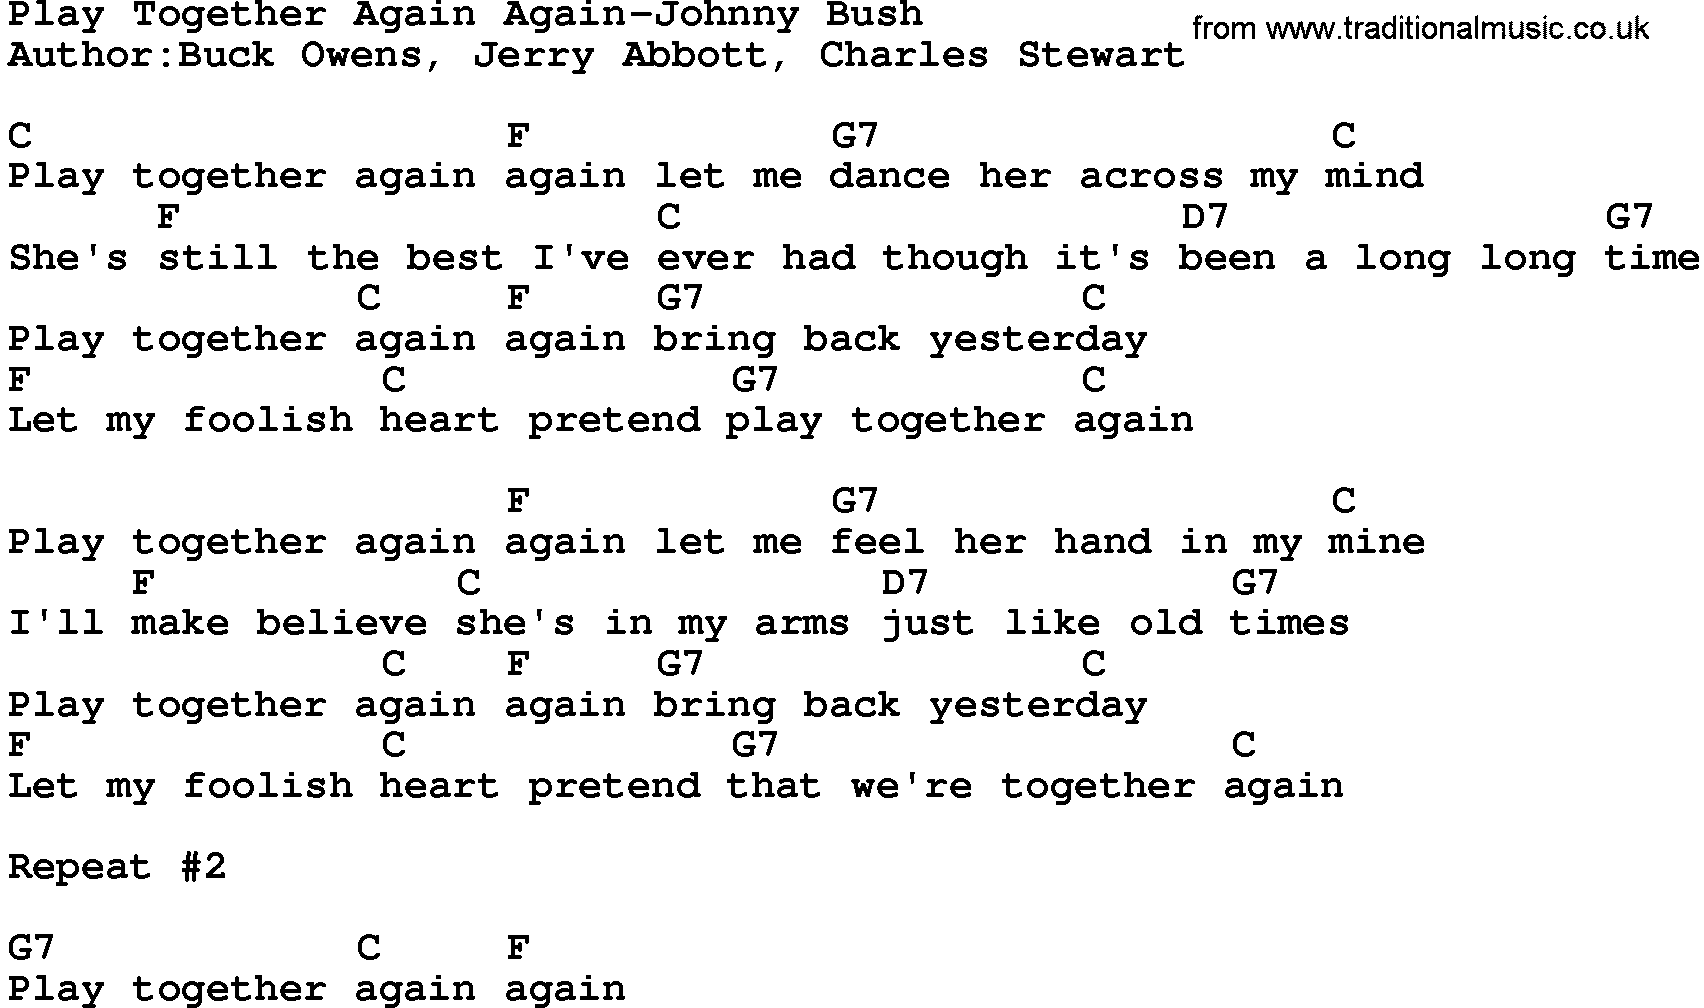 Country music song: Play Together Again Again-Johnny Bush lyrics and chords